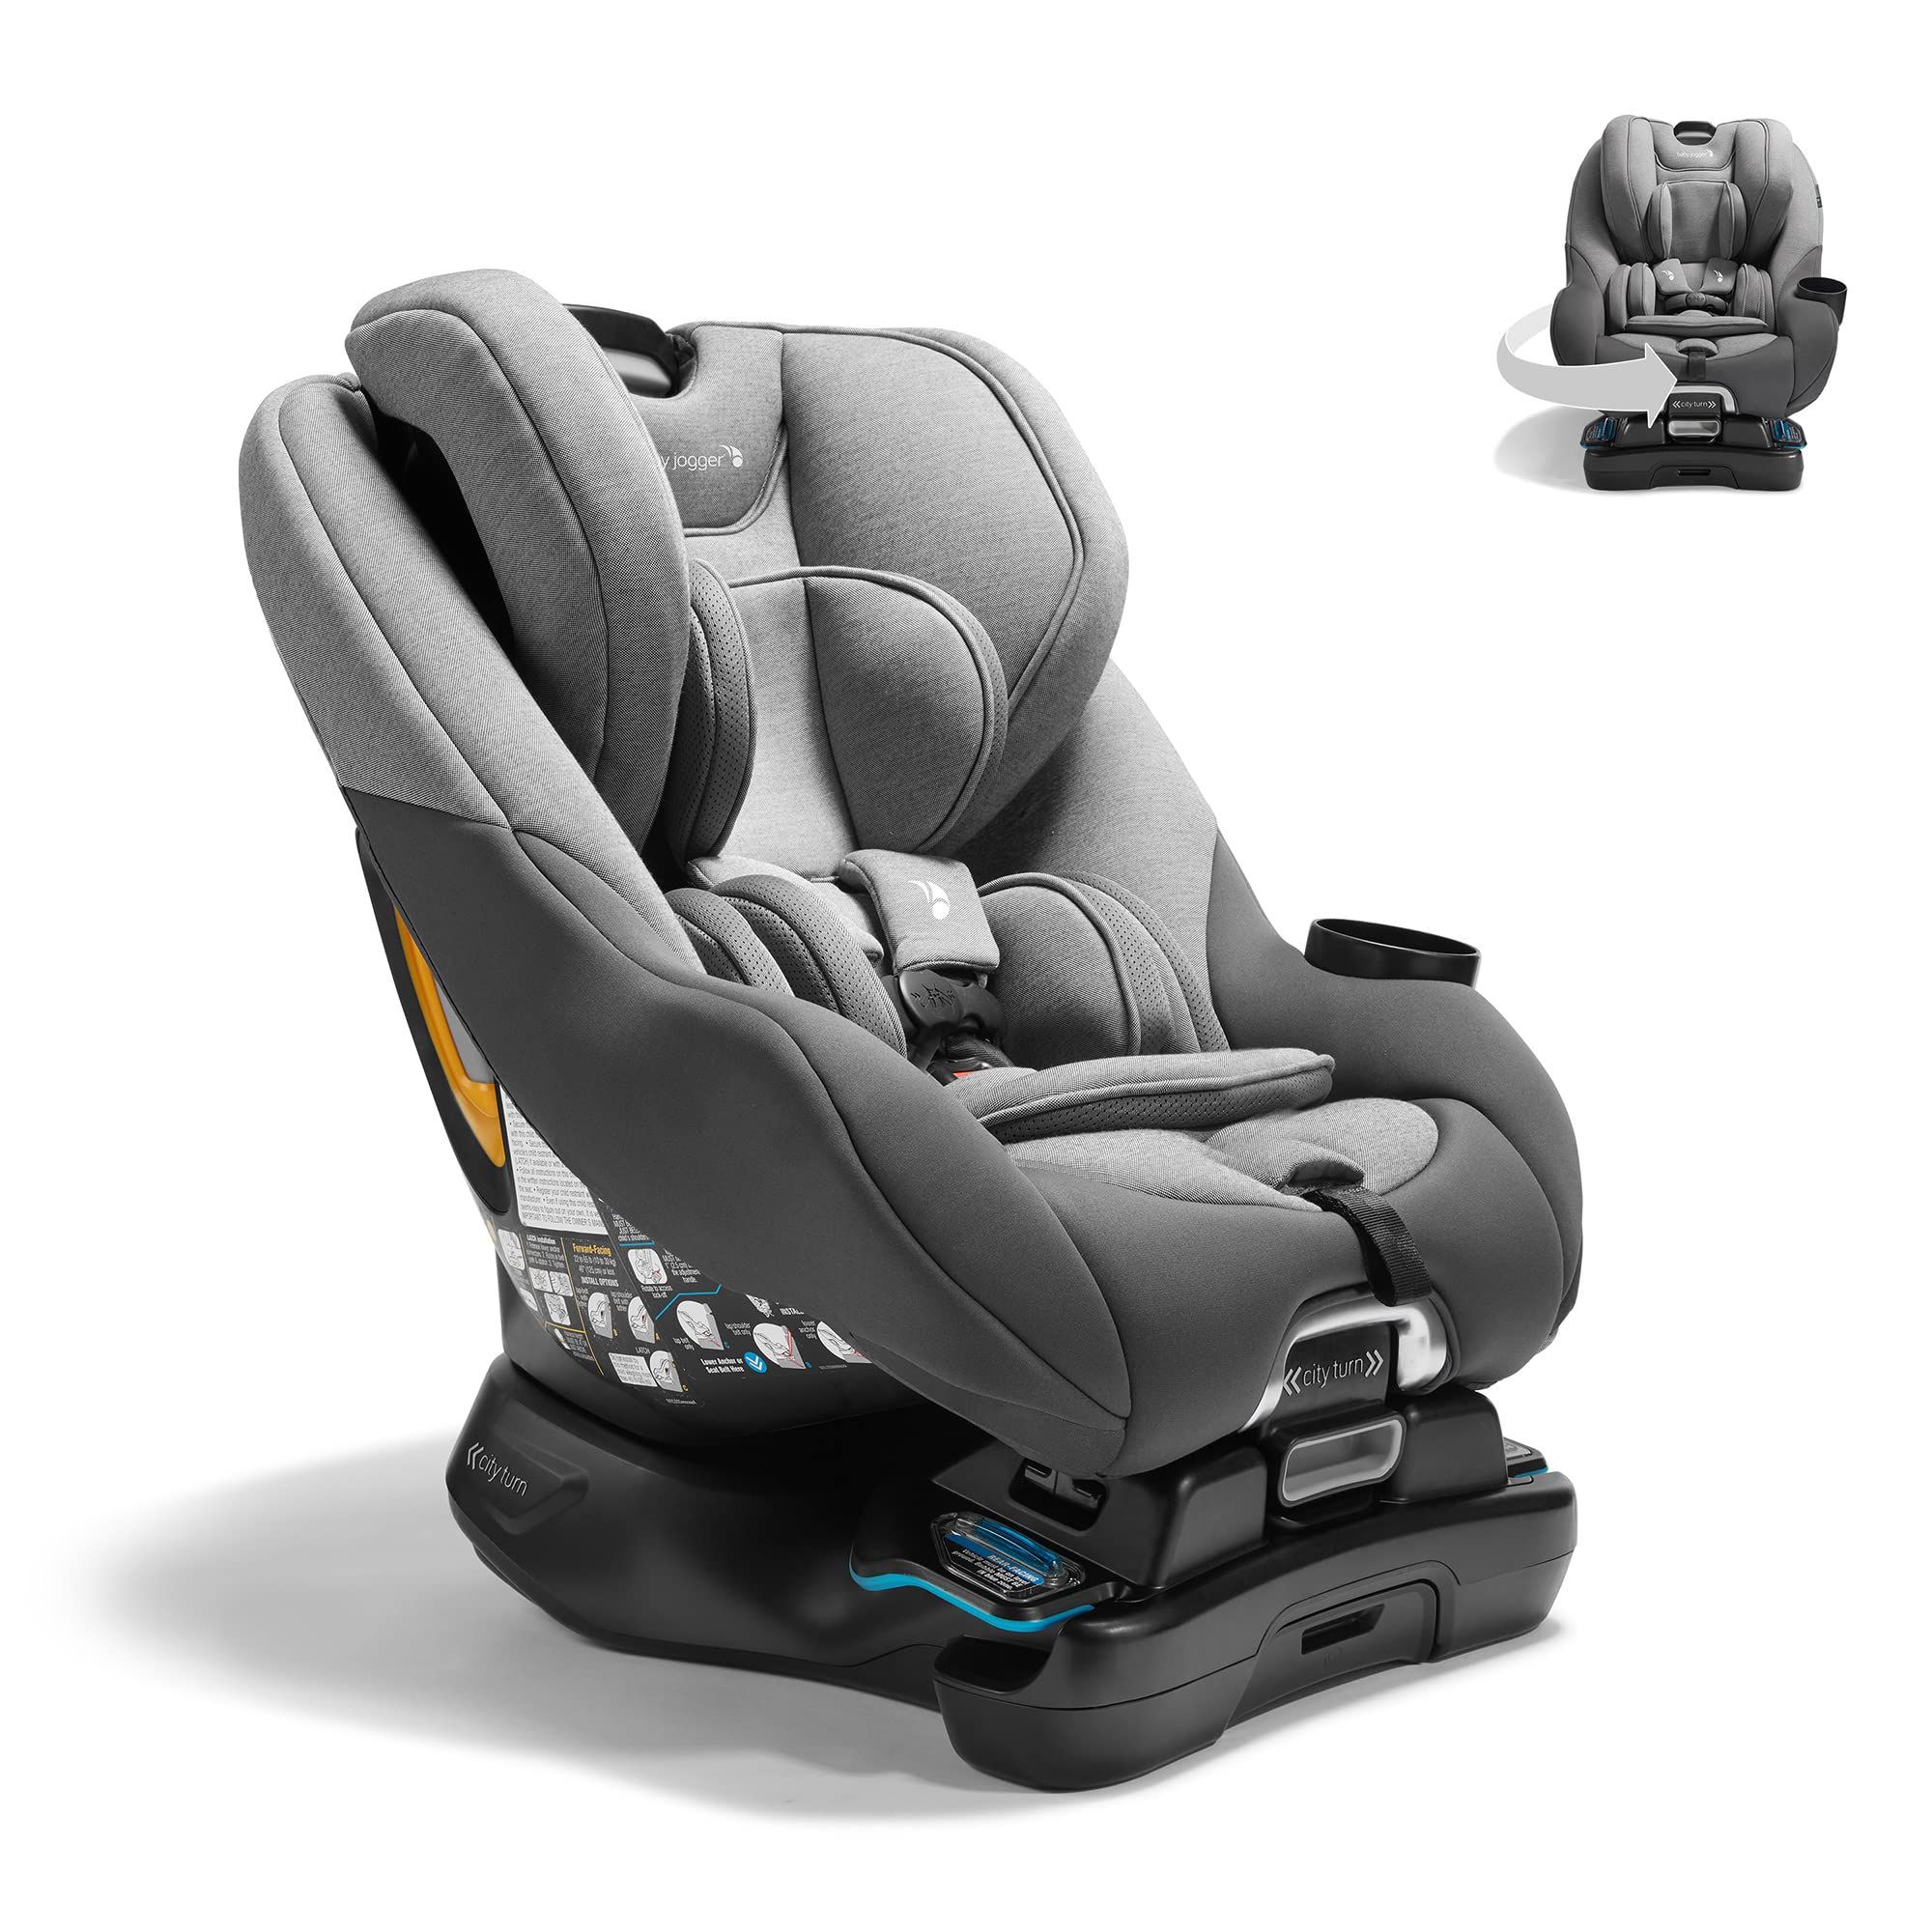 <p><strong>$549.99</strong></p><p>Another new category that has emerged in the car seat market: convertible car seats that rotate, so you can strap your baby in with them facing the car door, then spin your baby back into a rear-facing position. This makes the <strong>load-in easier, since you can face your baby as you clip the harness buckle into place</strong>. No more leaning into the backseat and twisting yourself like a pretzel!</p><p>While testing, we loved how exceptionally comfortable the padding is on this seat, which along with the rotation helps justify the high price. But the swivel feature does not work in for the forward-facing setup, and this does not become a booster seat. There are five recline positions but tilting the seat forward and back is a little tougher with this than with other seats. Finally, due to the innovative swivel base, this seat is rather large and doesn't fit in all vehicles, so if you have a sedan, pay attention to the seat's dimensions to make sure it will fit inside.</p>